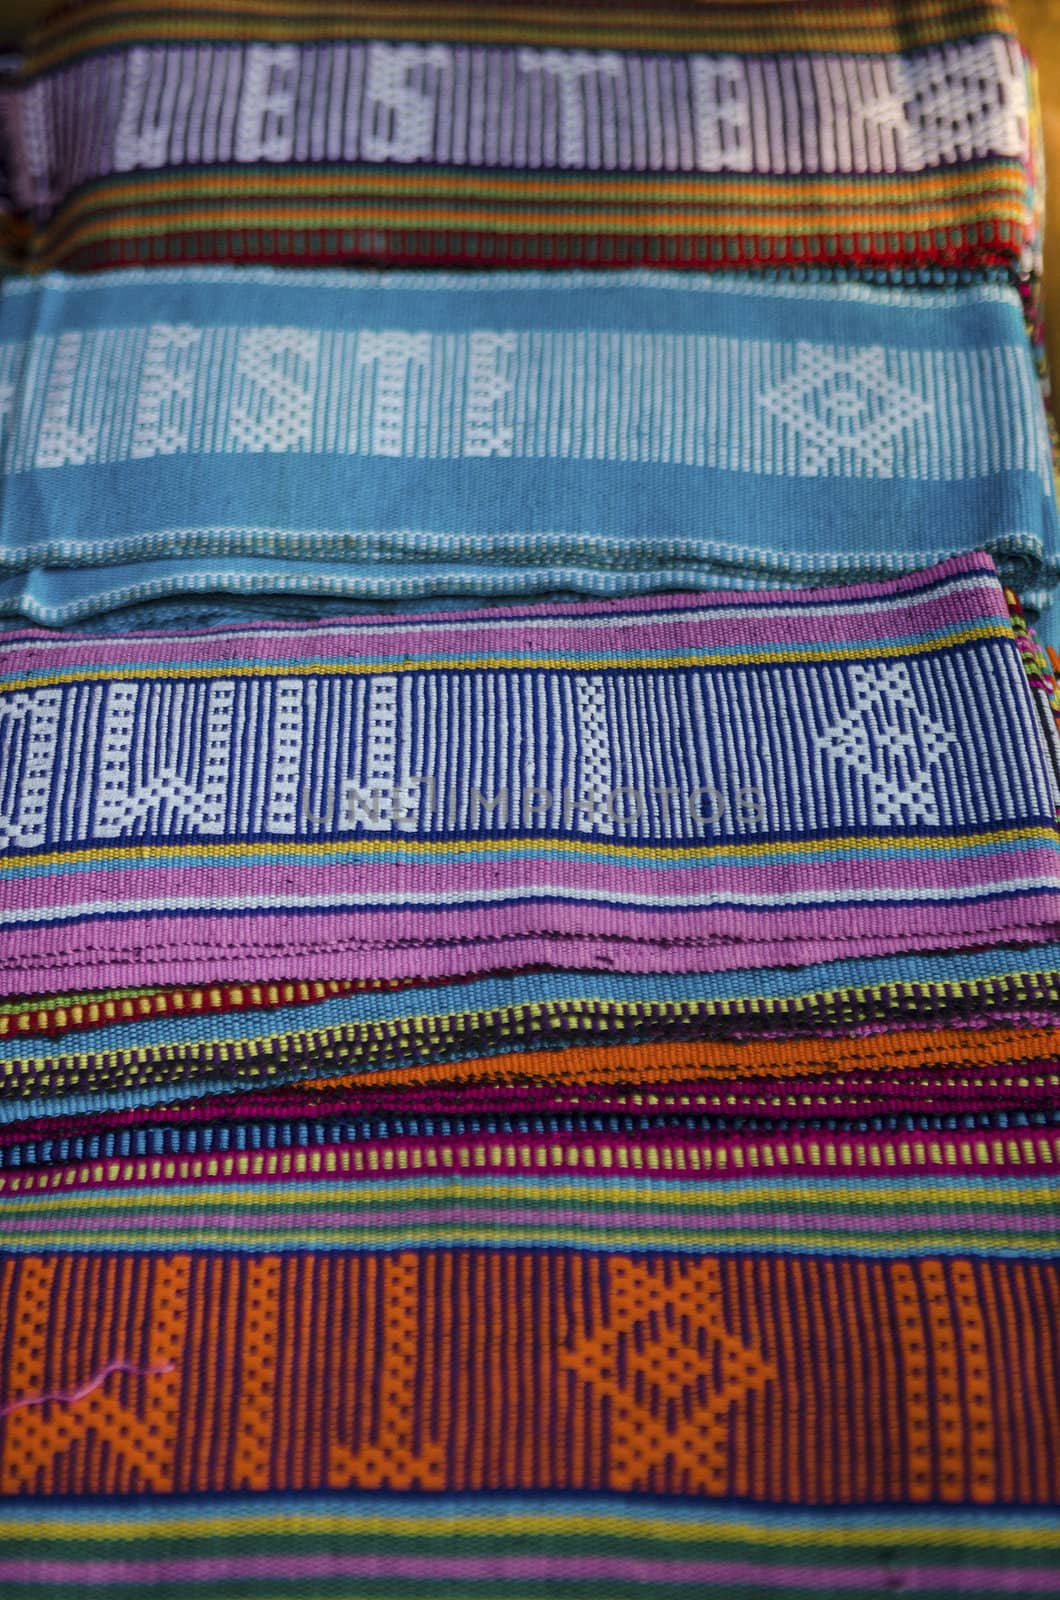 tais traditional fabric in dili east timor by jackmalipan